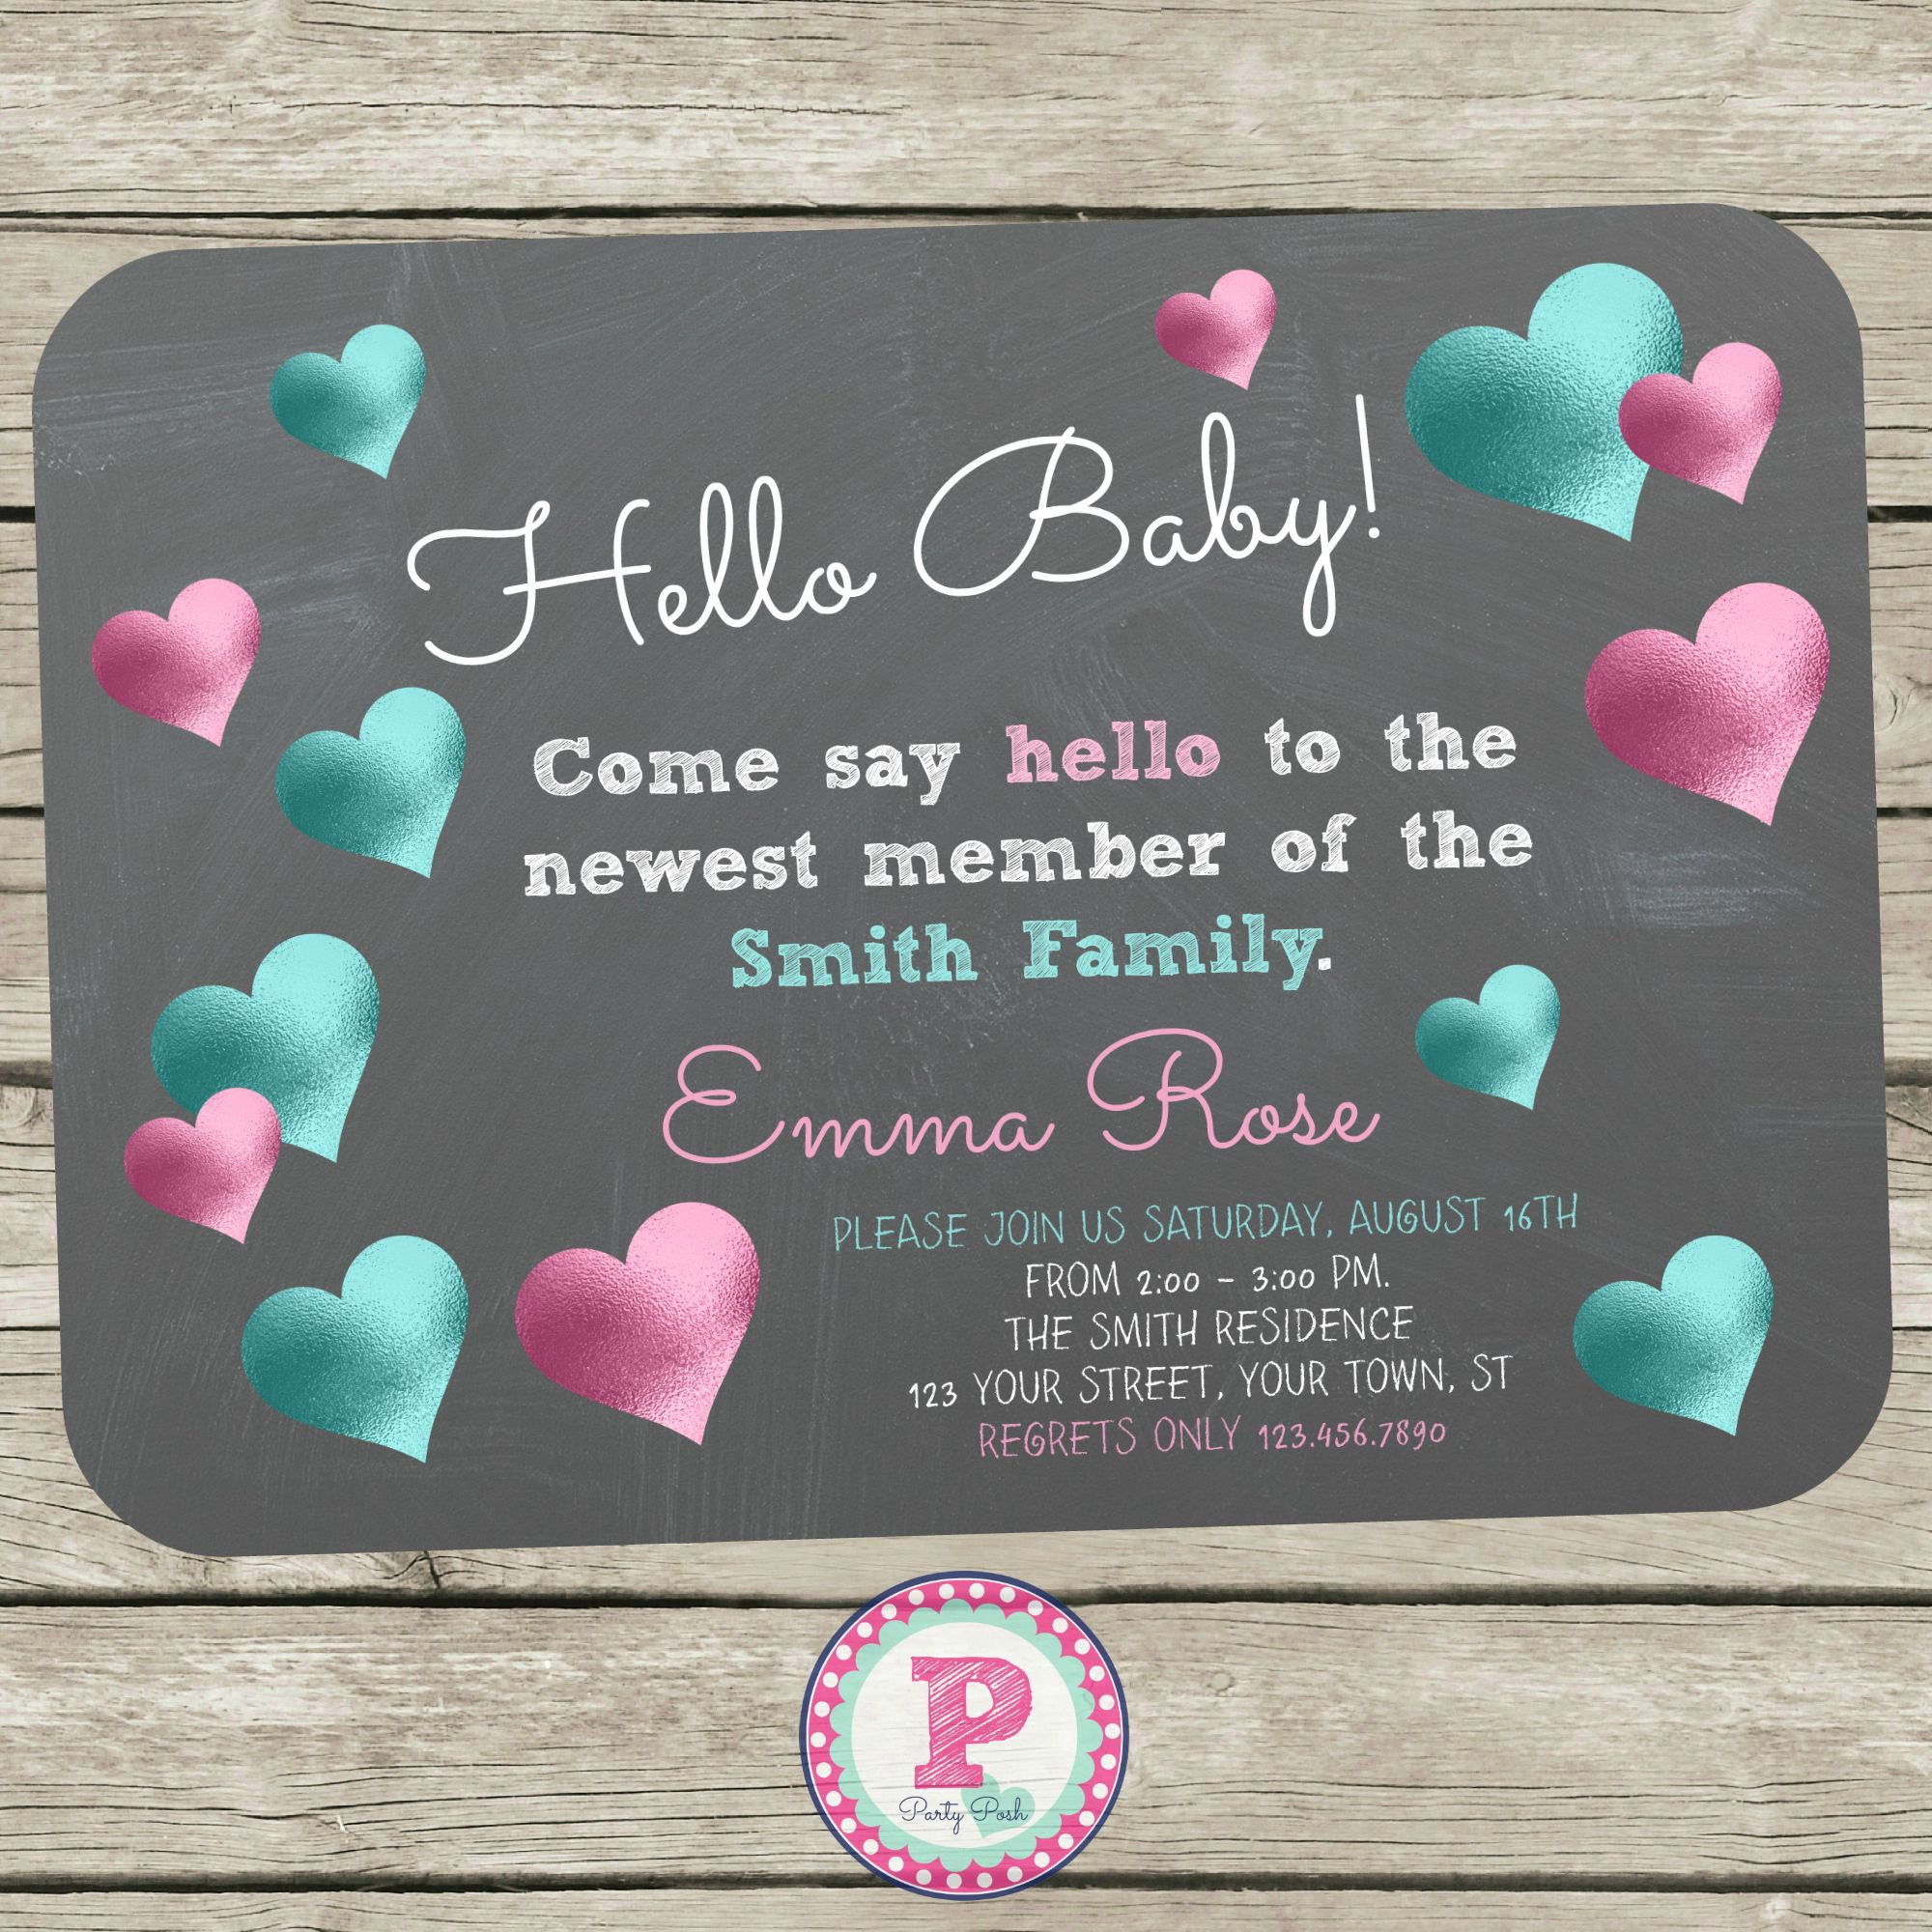 Meet The Baby Party Ideas
 Hello Baby Invitations for a meet the baby party